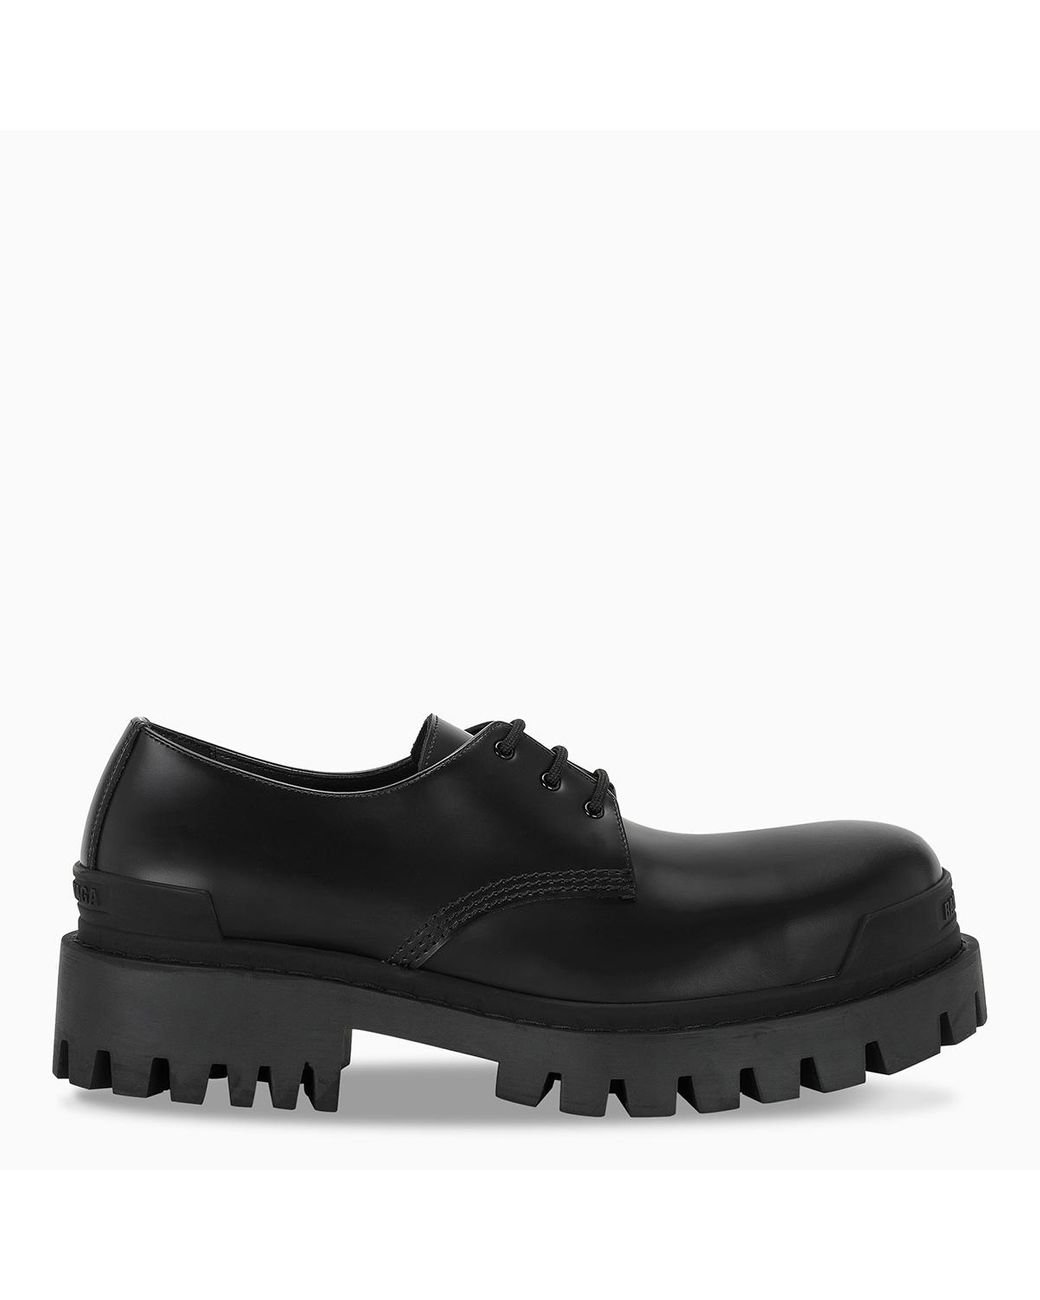 Balenciaga Leather Black Chunky Shoes for Men - Lyst